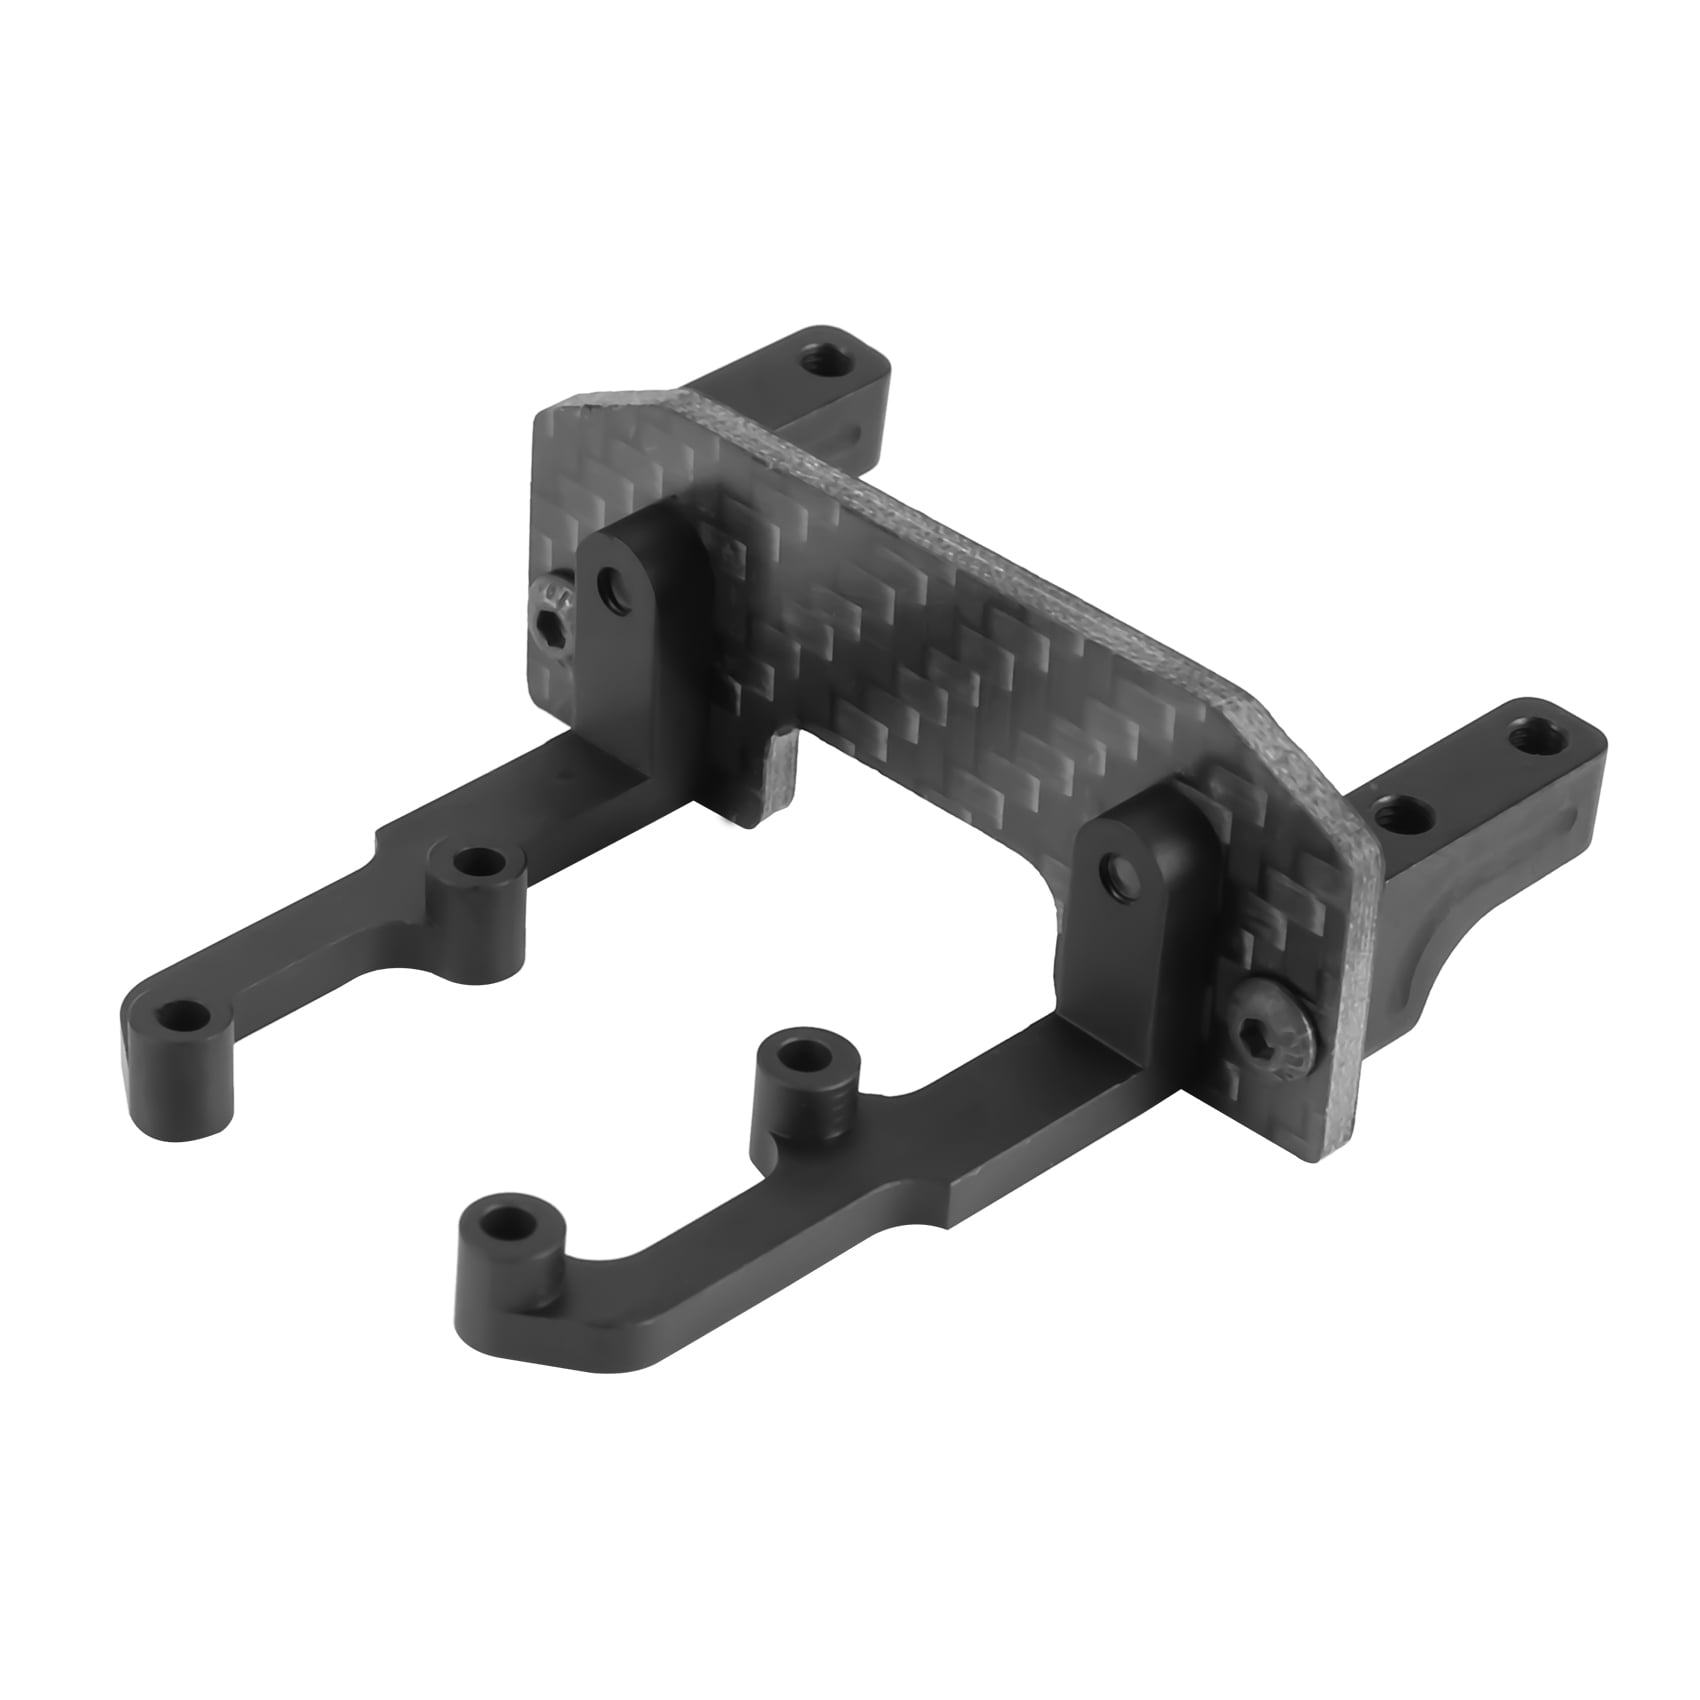 BE_ RC Car Servo Mount Stand Holder Bracket for 1/10 Axial SCX10 II ...